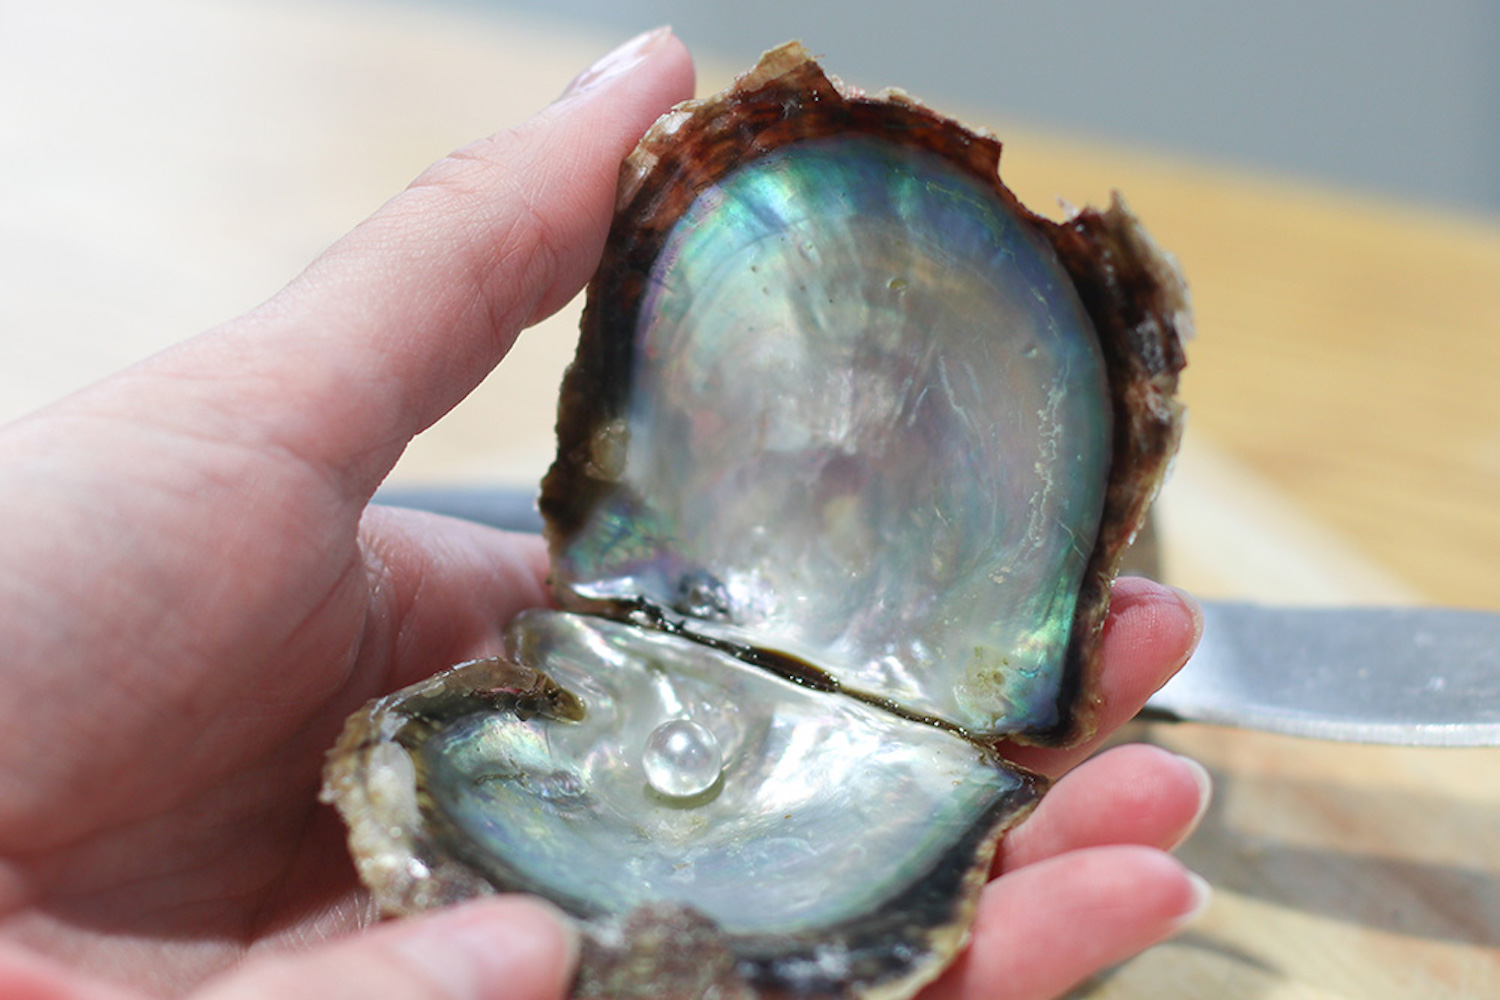 Cornwall Gold pearl in a shell being held